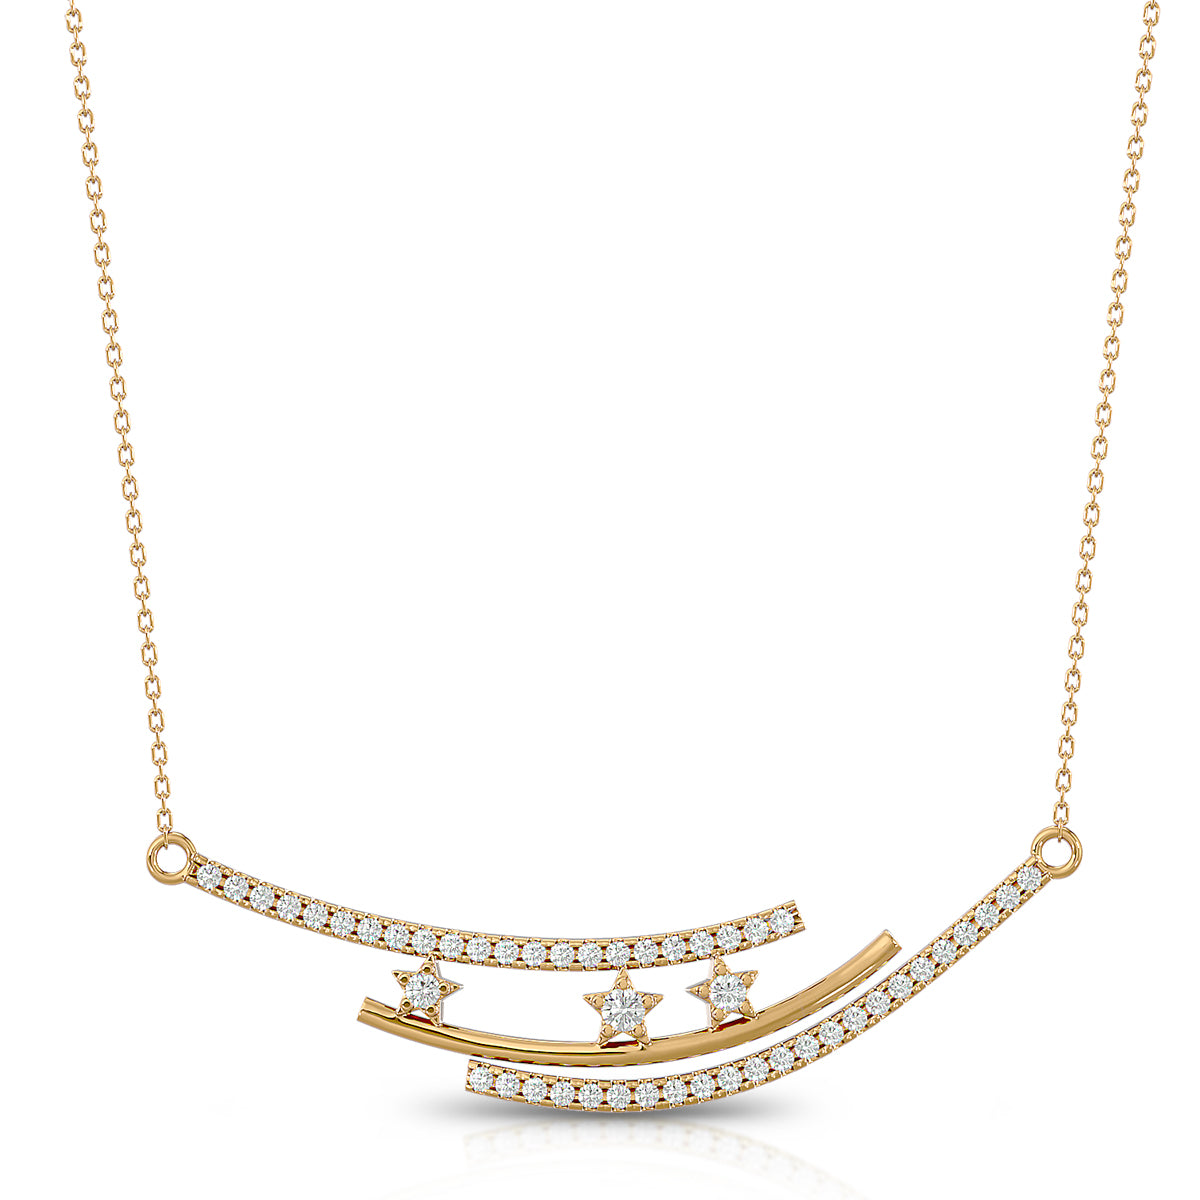 Energy Necklace 18K Gold With Diamonds